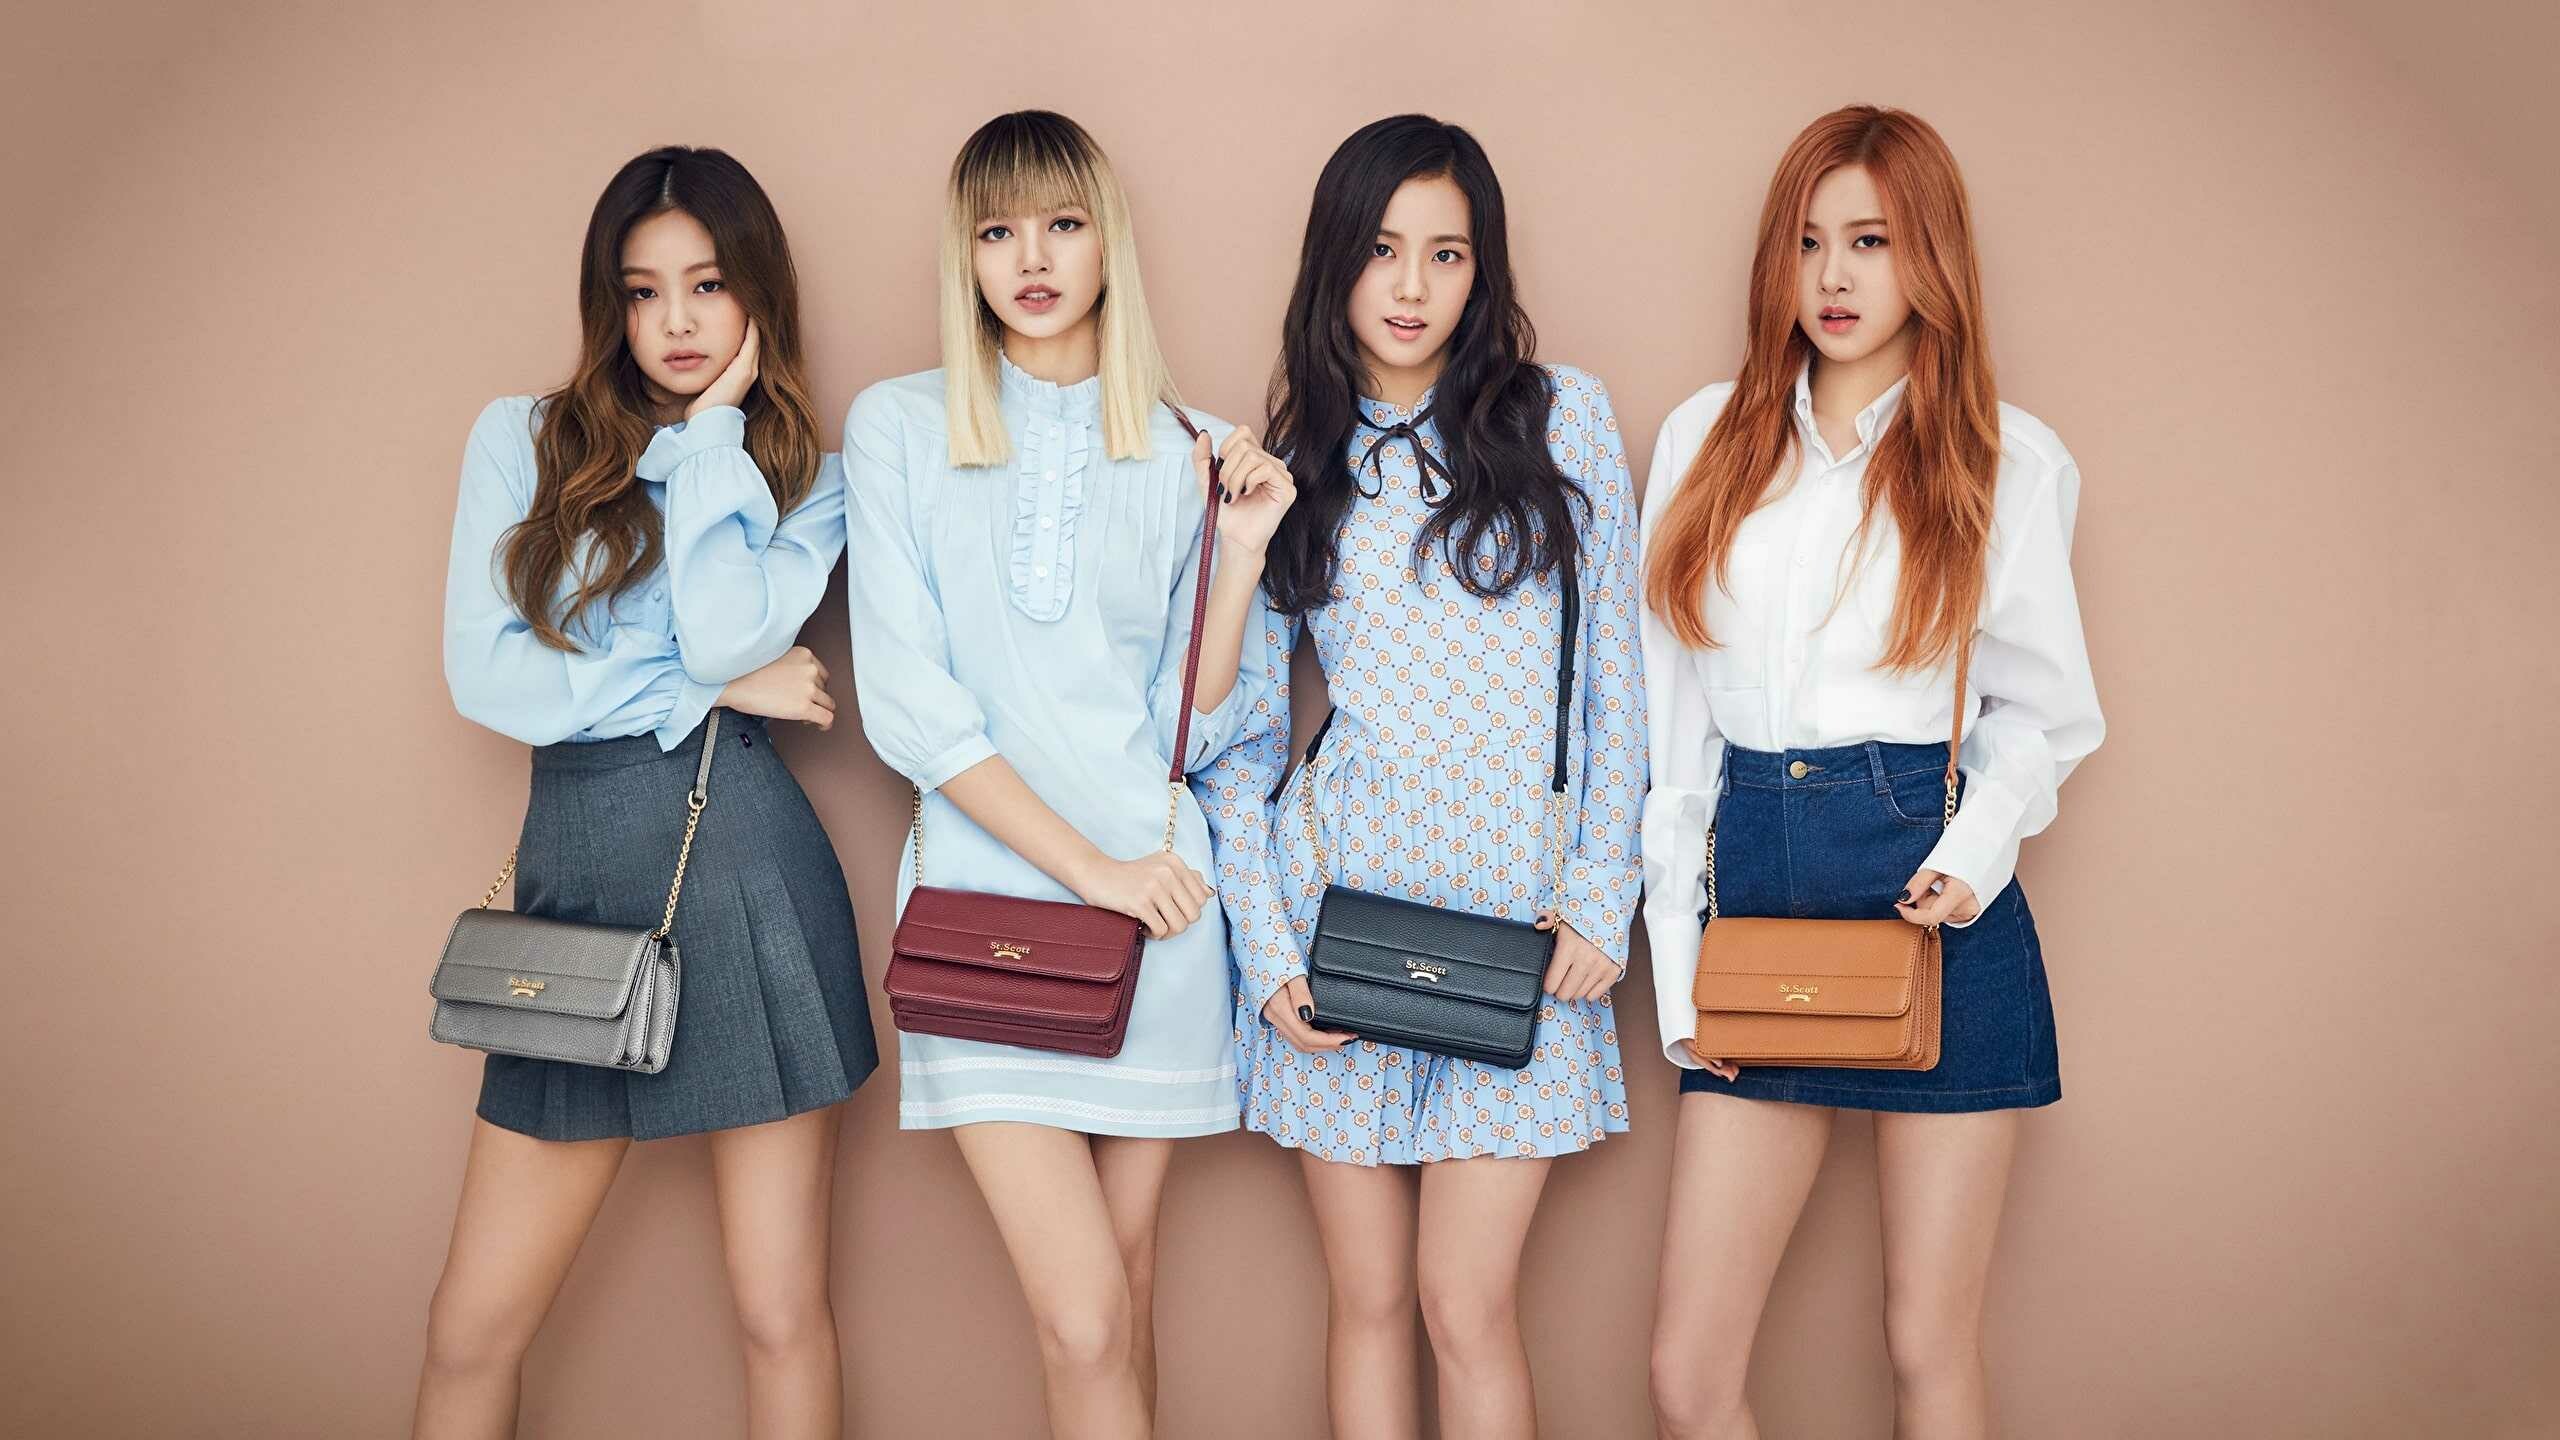 BLACKPINK: The first Korean girl group to enter and top the Billboard Emerging Artists chart. 2560x1440 HD Background.